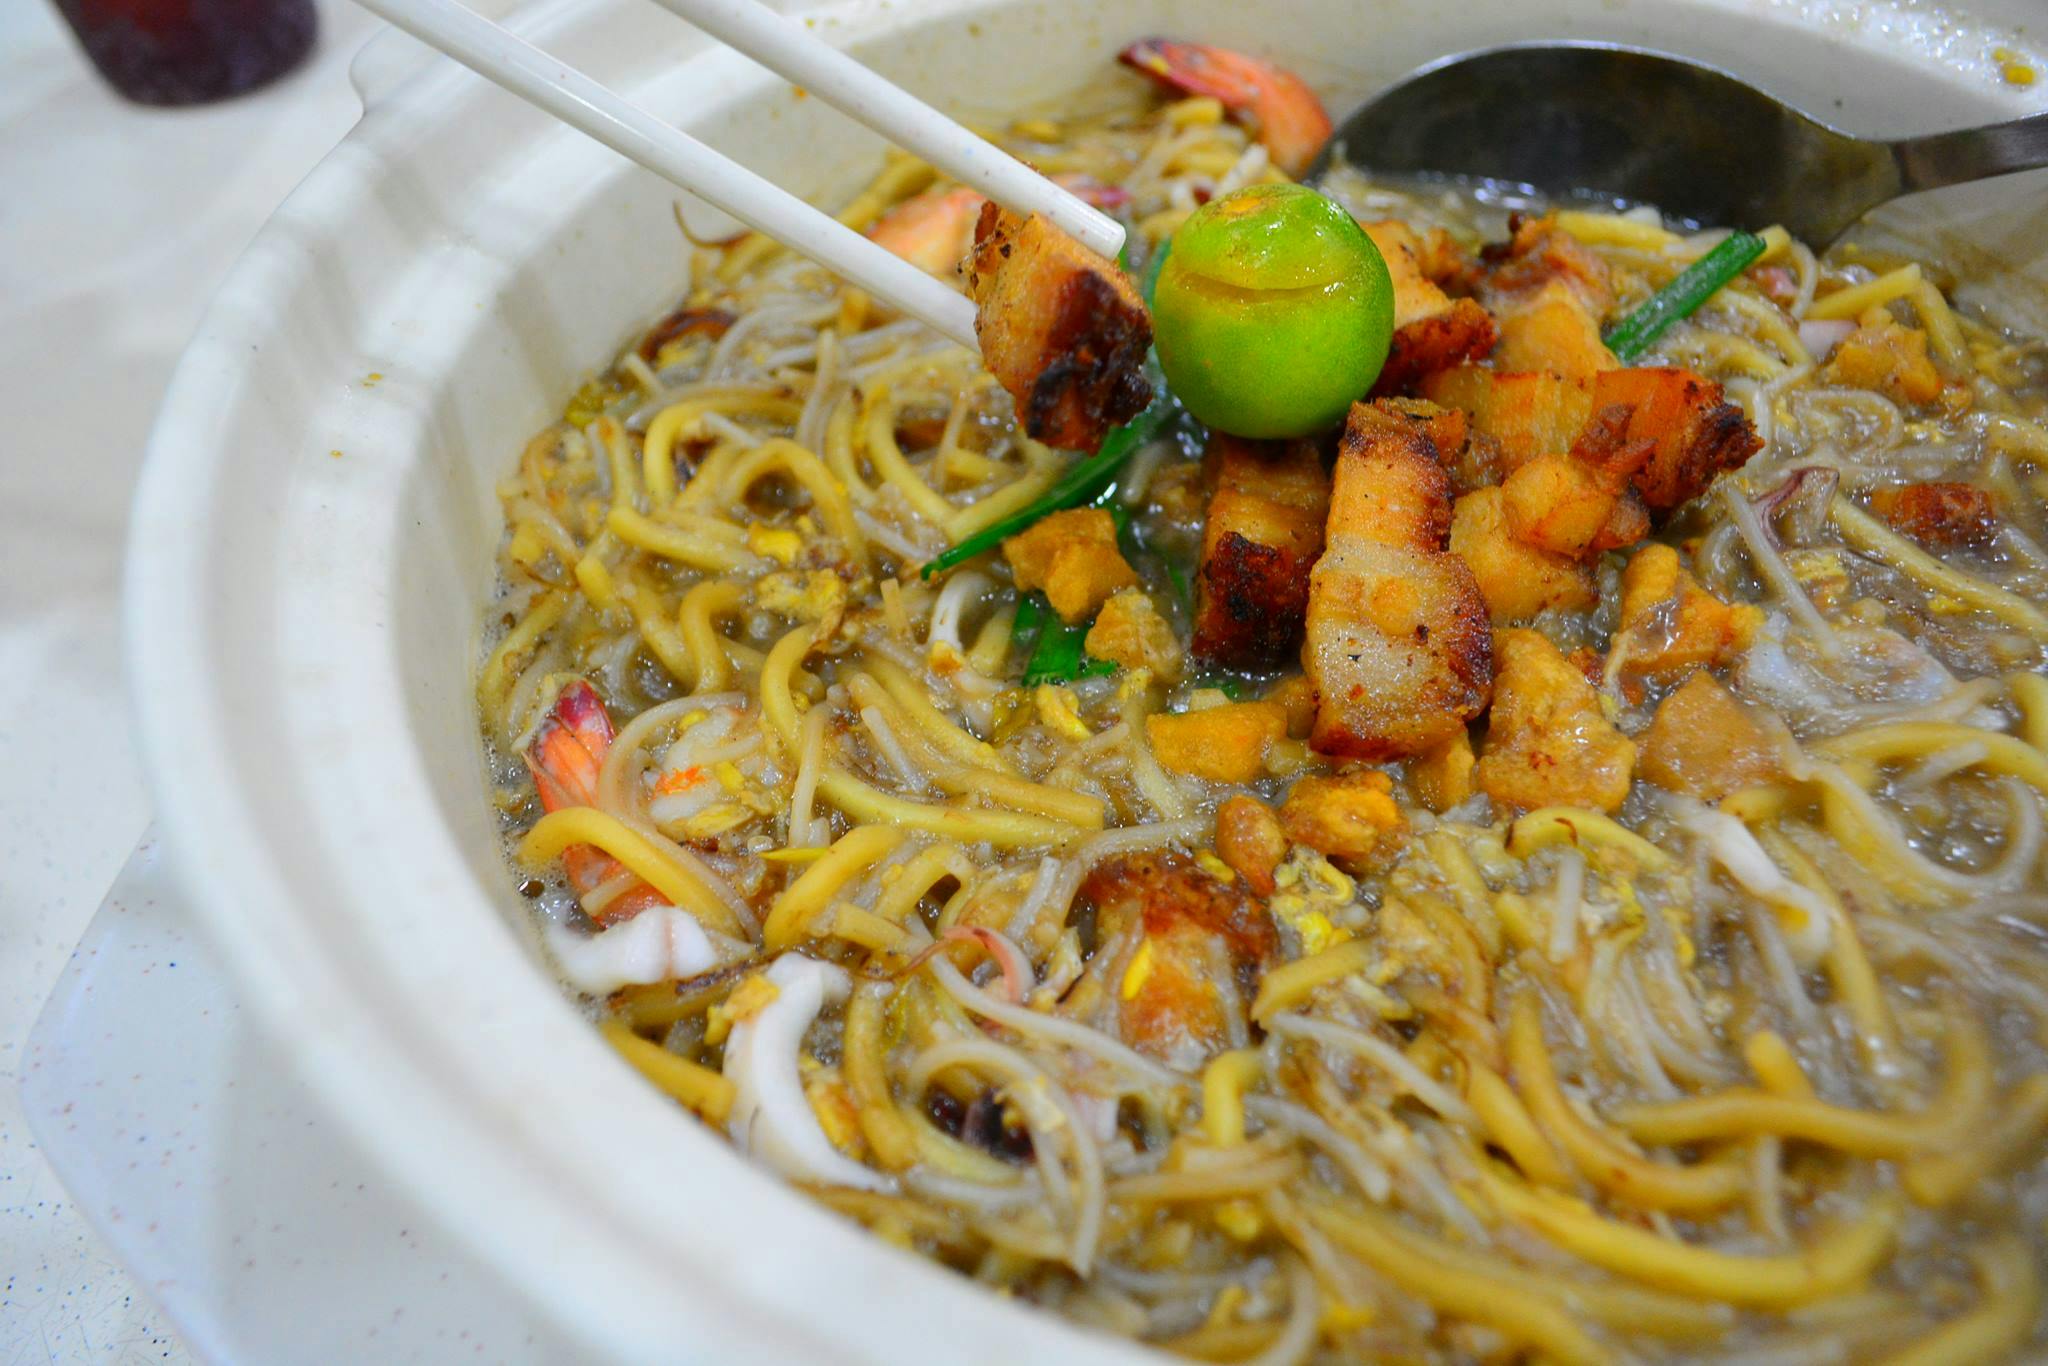 The mature estate of Toa Payoh is said to have some of Singapore's most 'true' local food, such as Kim Keat Hokkien Mee. 99.co.